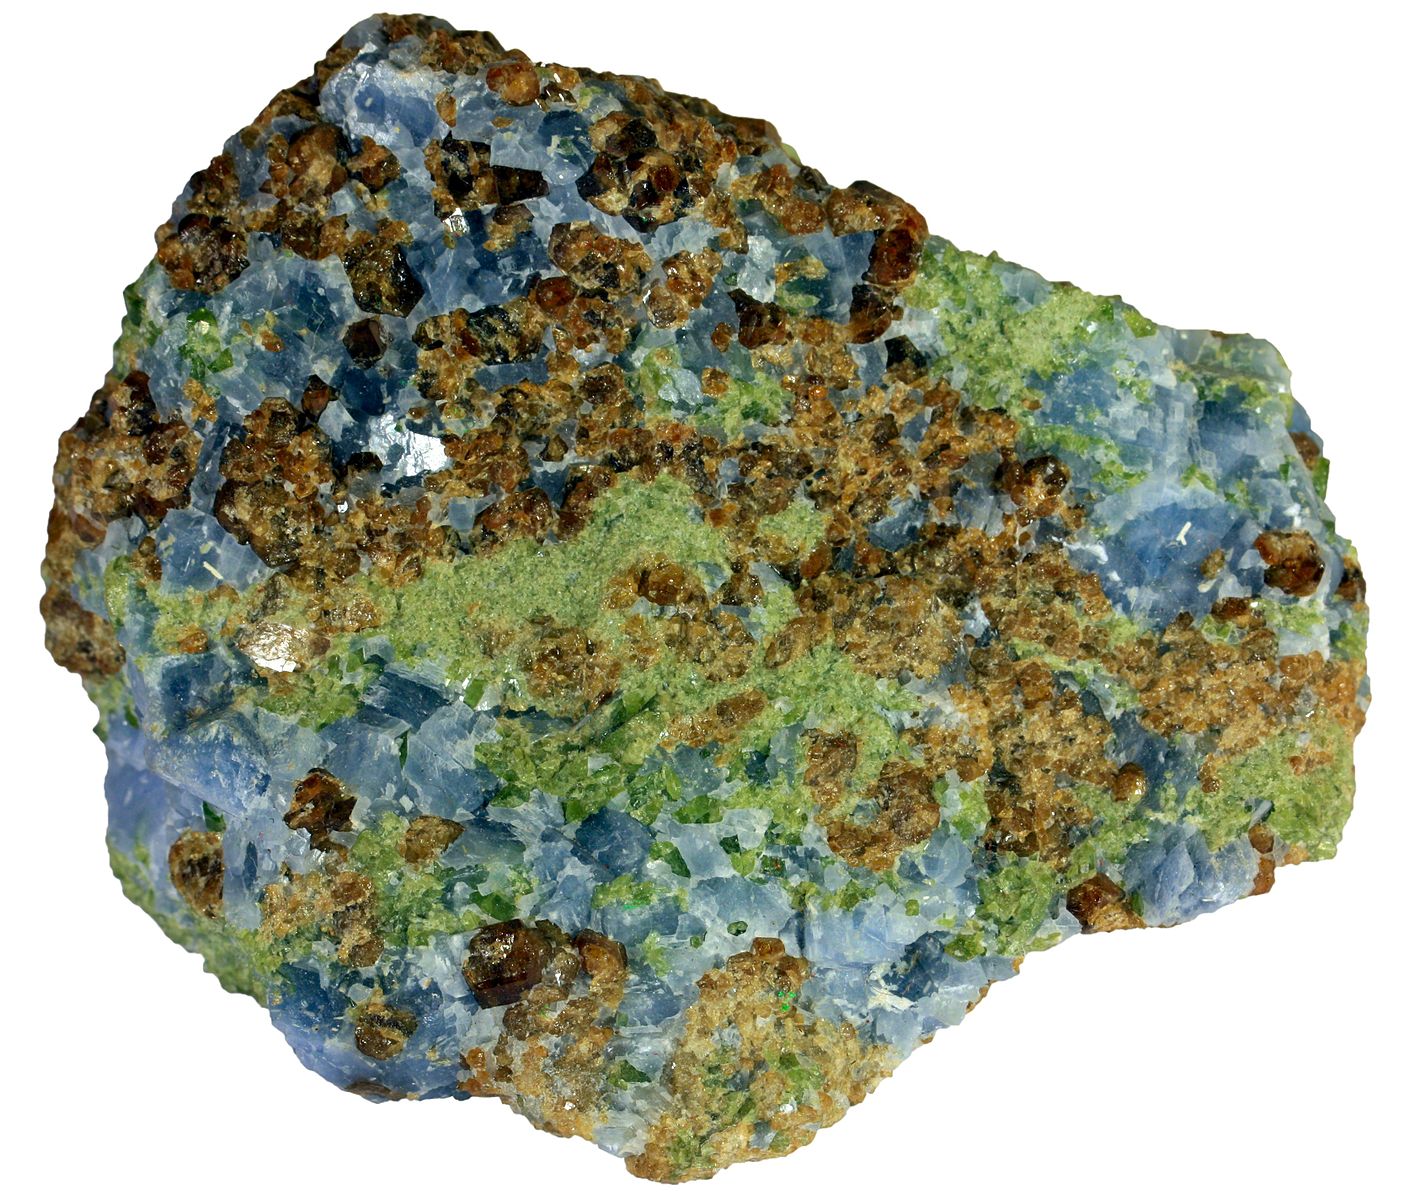 Calcite is blue, augite green, and garnet brown/orange in this rock.